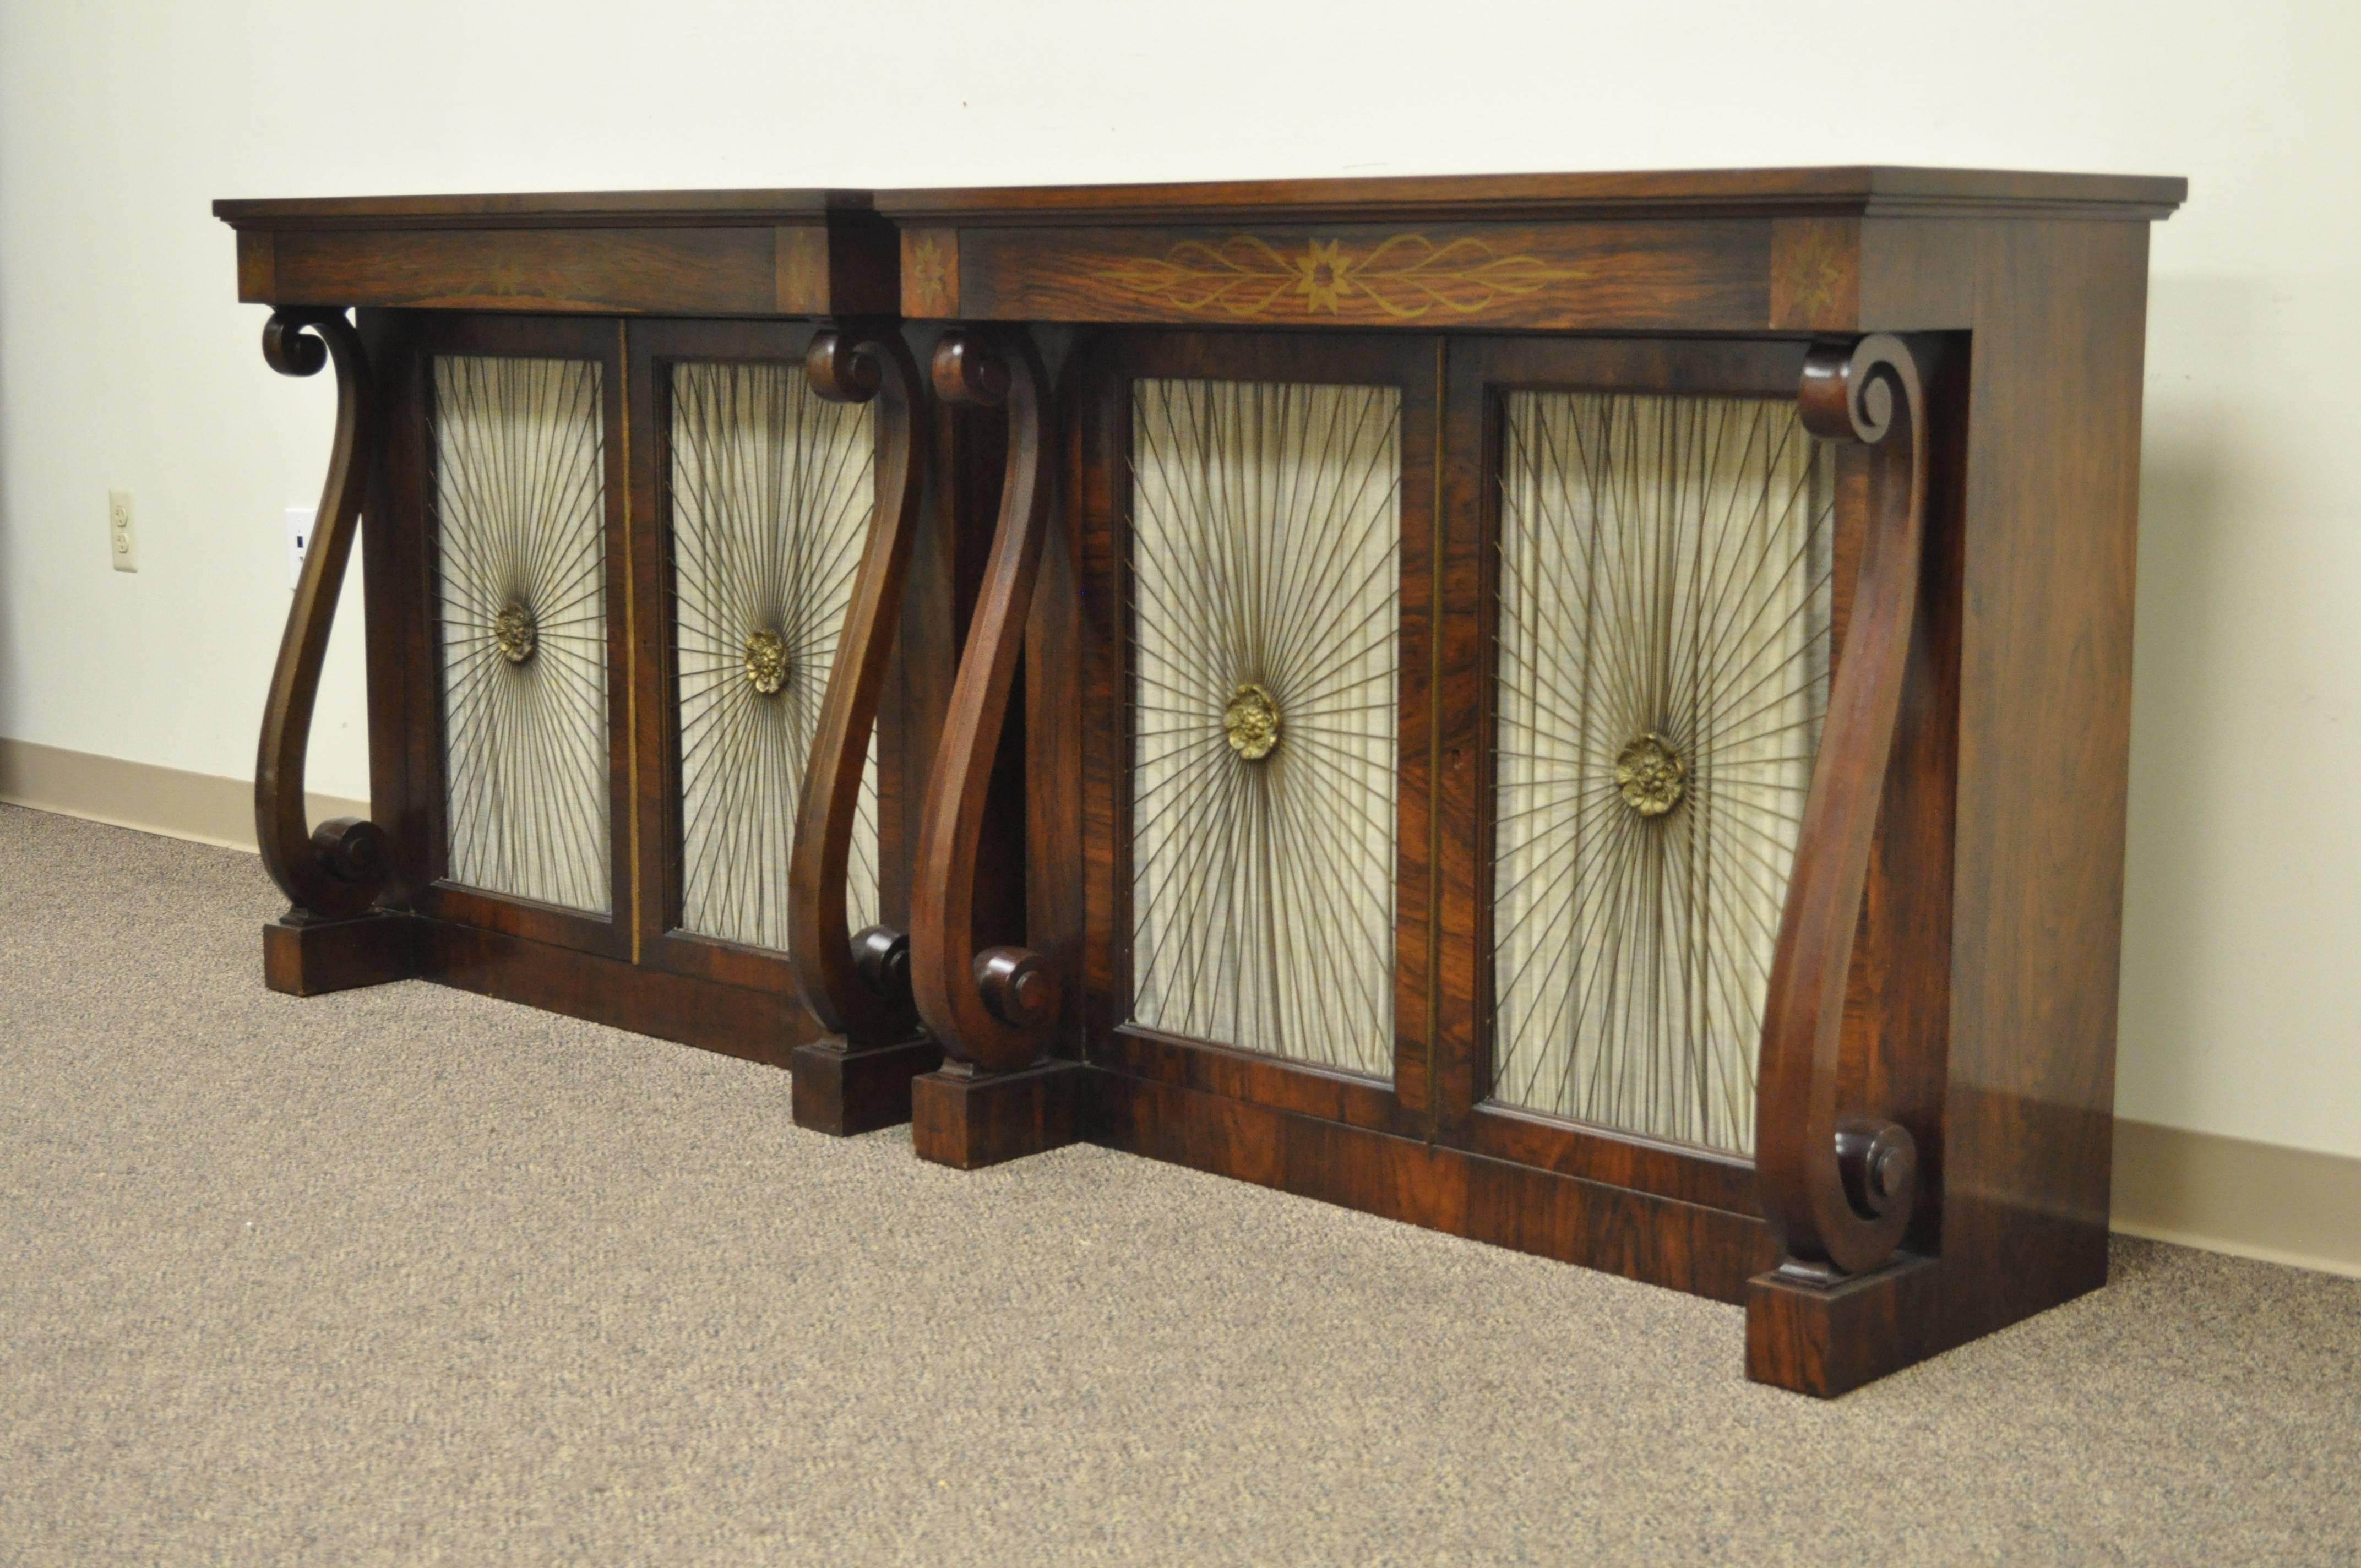 Stunning pair of vintage custom-made neoclassical / empire style rosewood console or hall tables by Daniel Jones Inc. NY. The pair of features dovetail constructed drawers with decorative brass inlay, lower cabinet doors with brass sunburst grills,